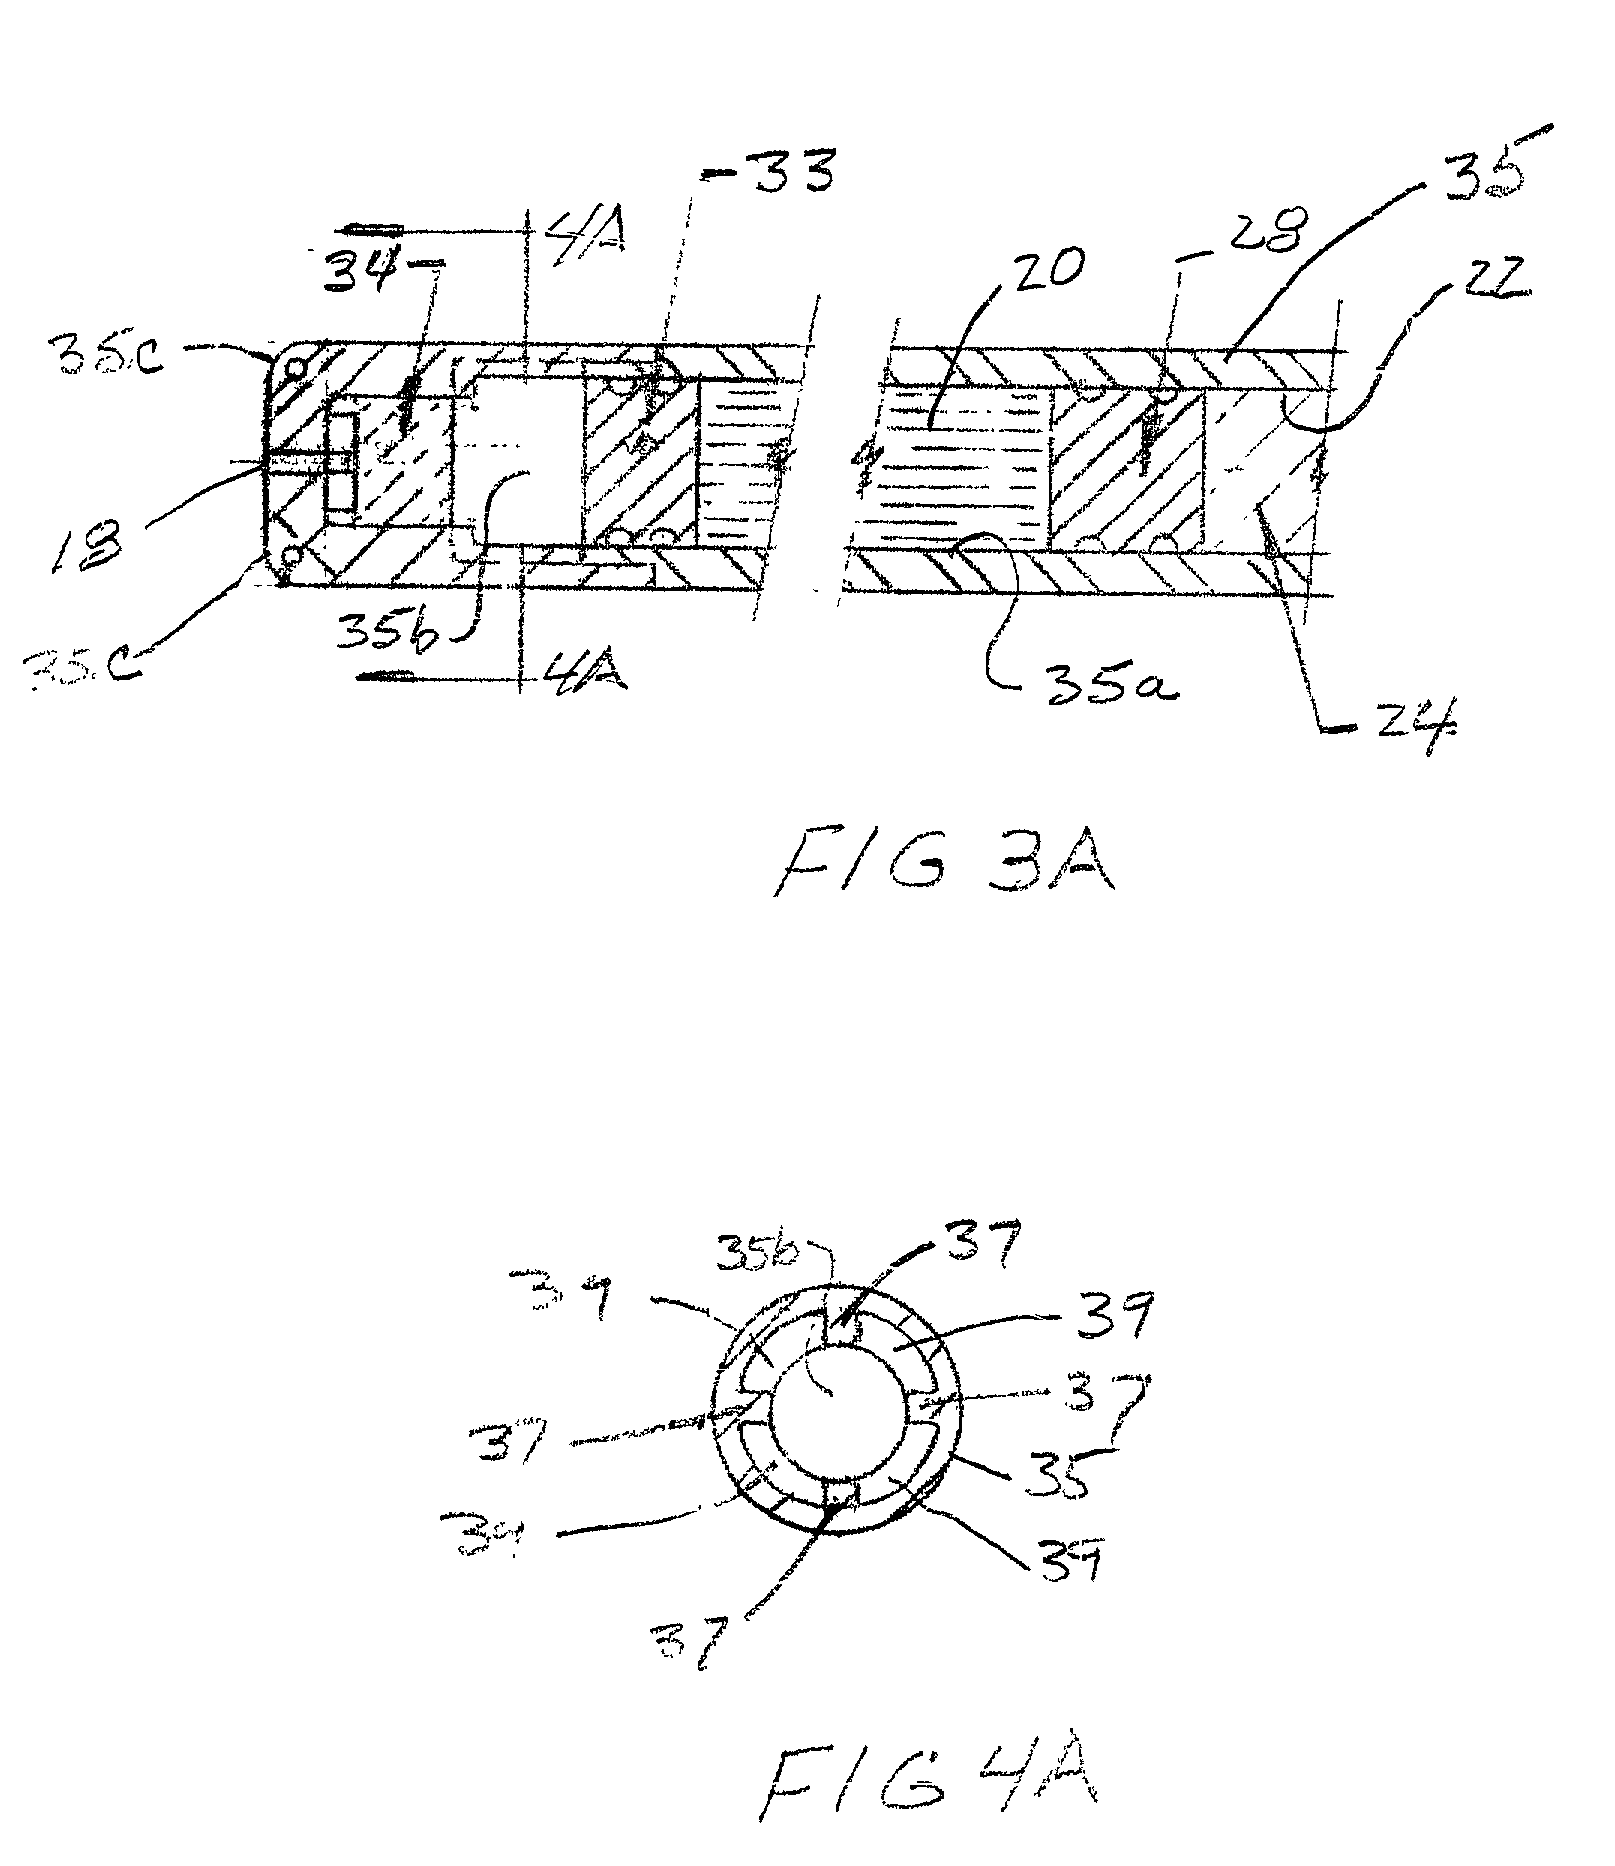 Implantable dispensing device for controllably dispensing medicinal fluid